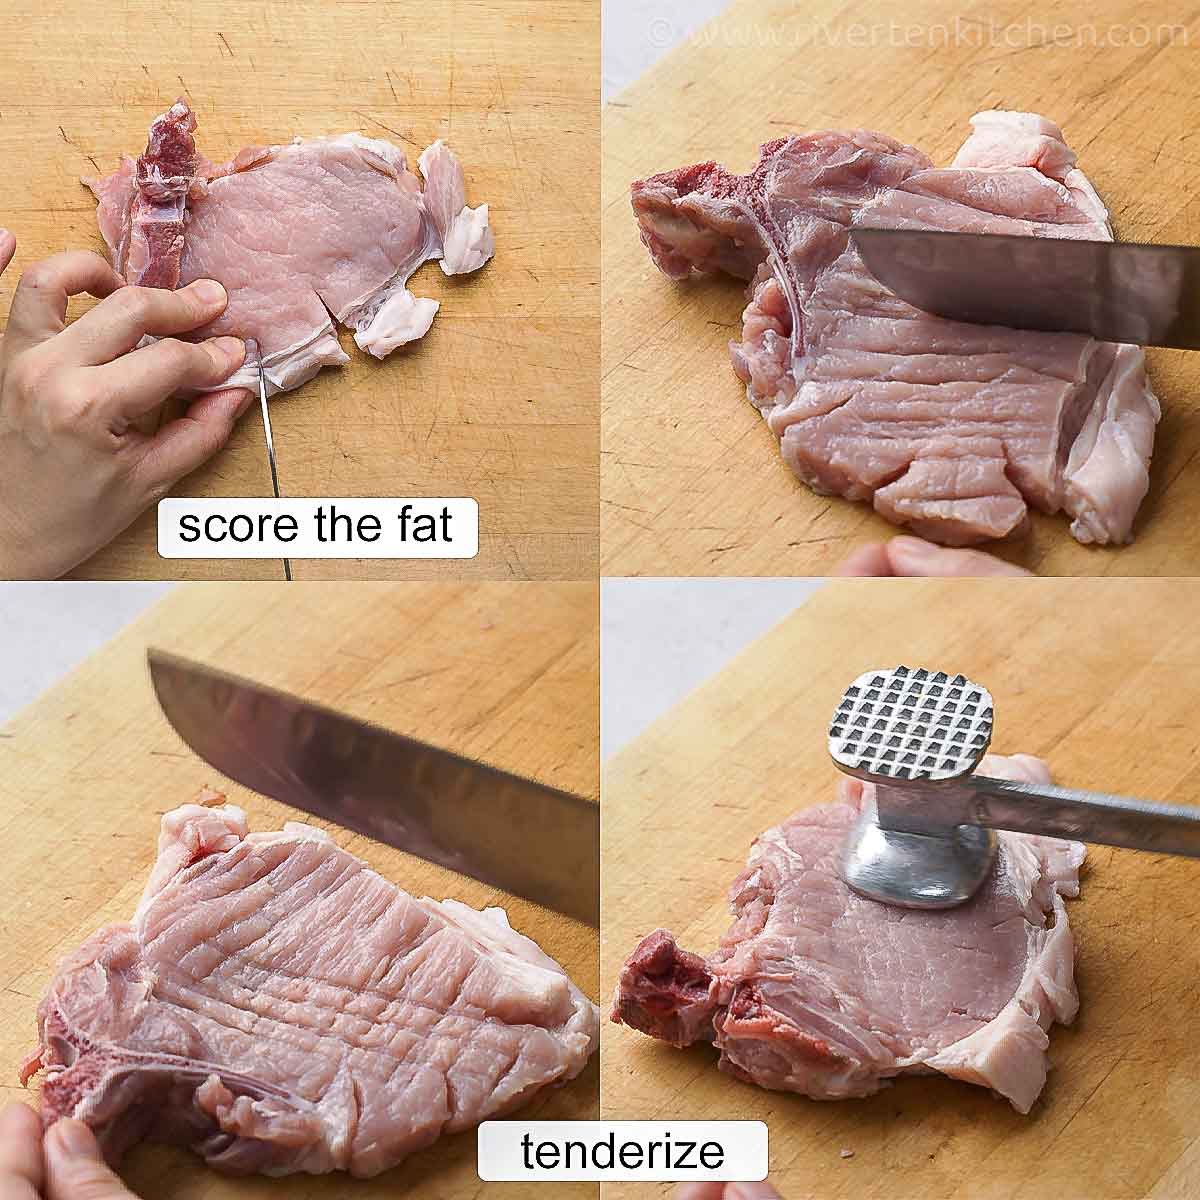 steps on how to prevent pork chops from curling and steps on how to tenderize pork chops with a mallet.